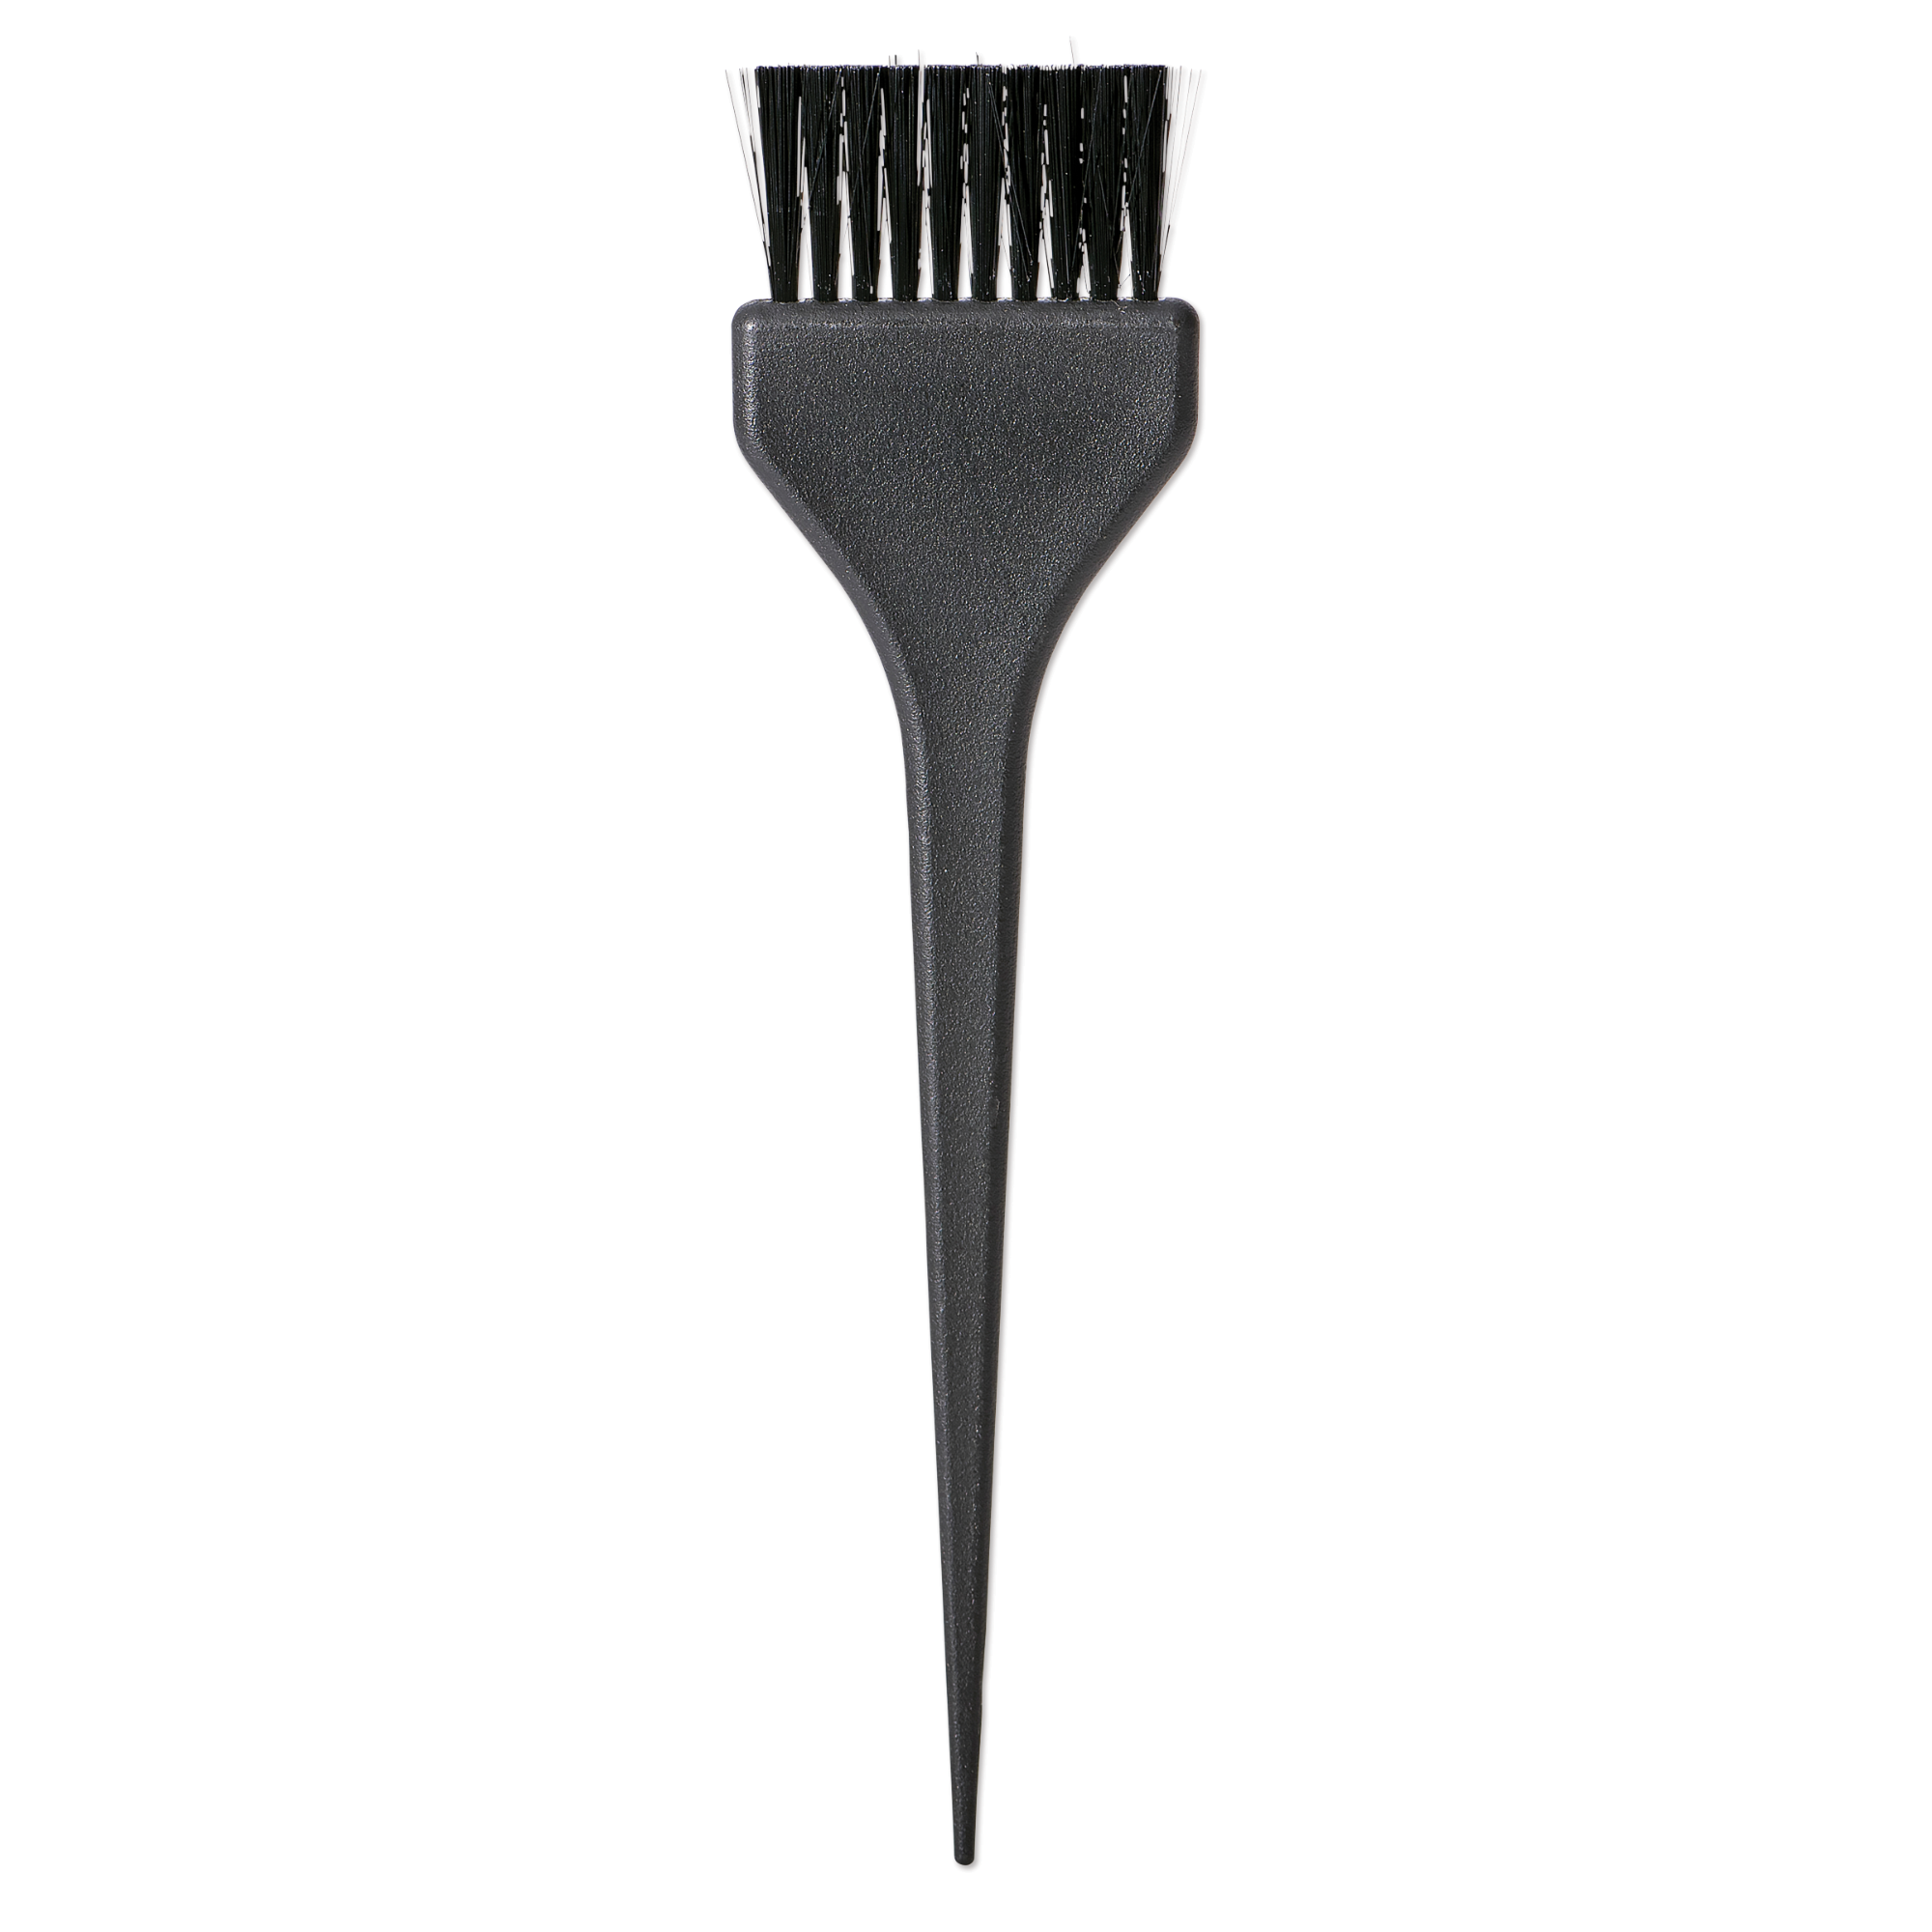 Hair Color/Highlighting Brush - 2" Wide